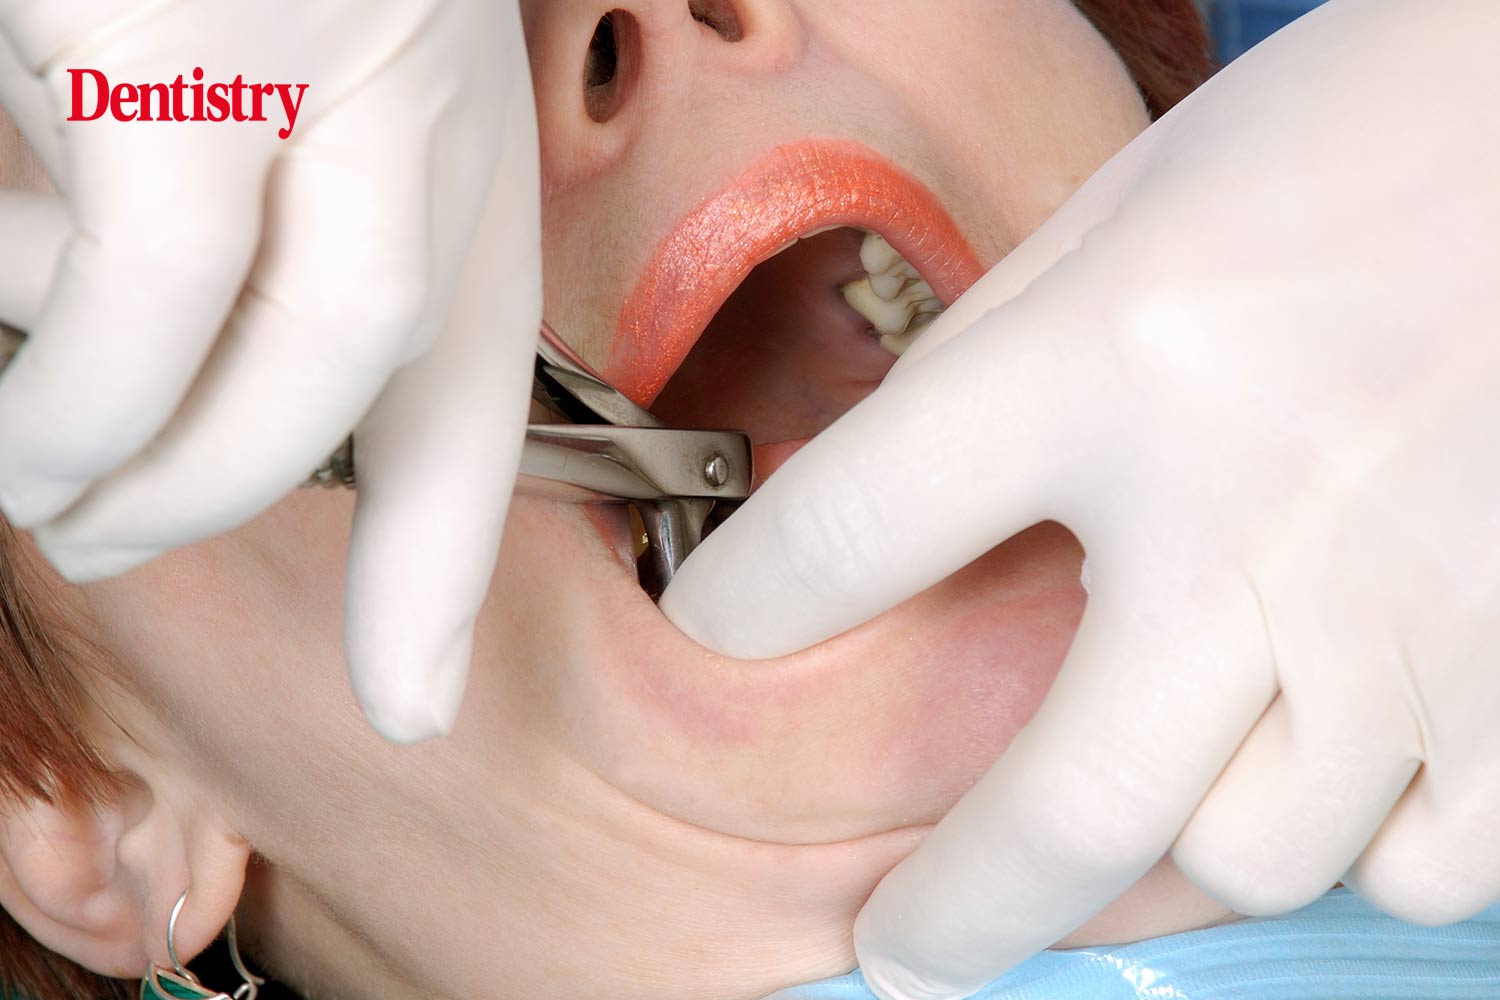 Women breaks into dental practice and extracts 13 teeth from patient